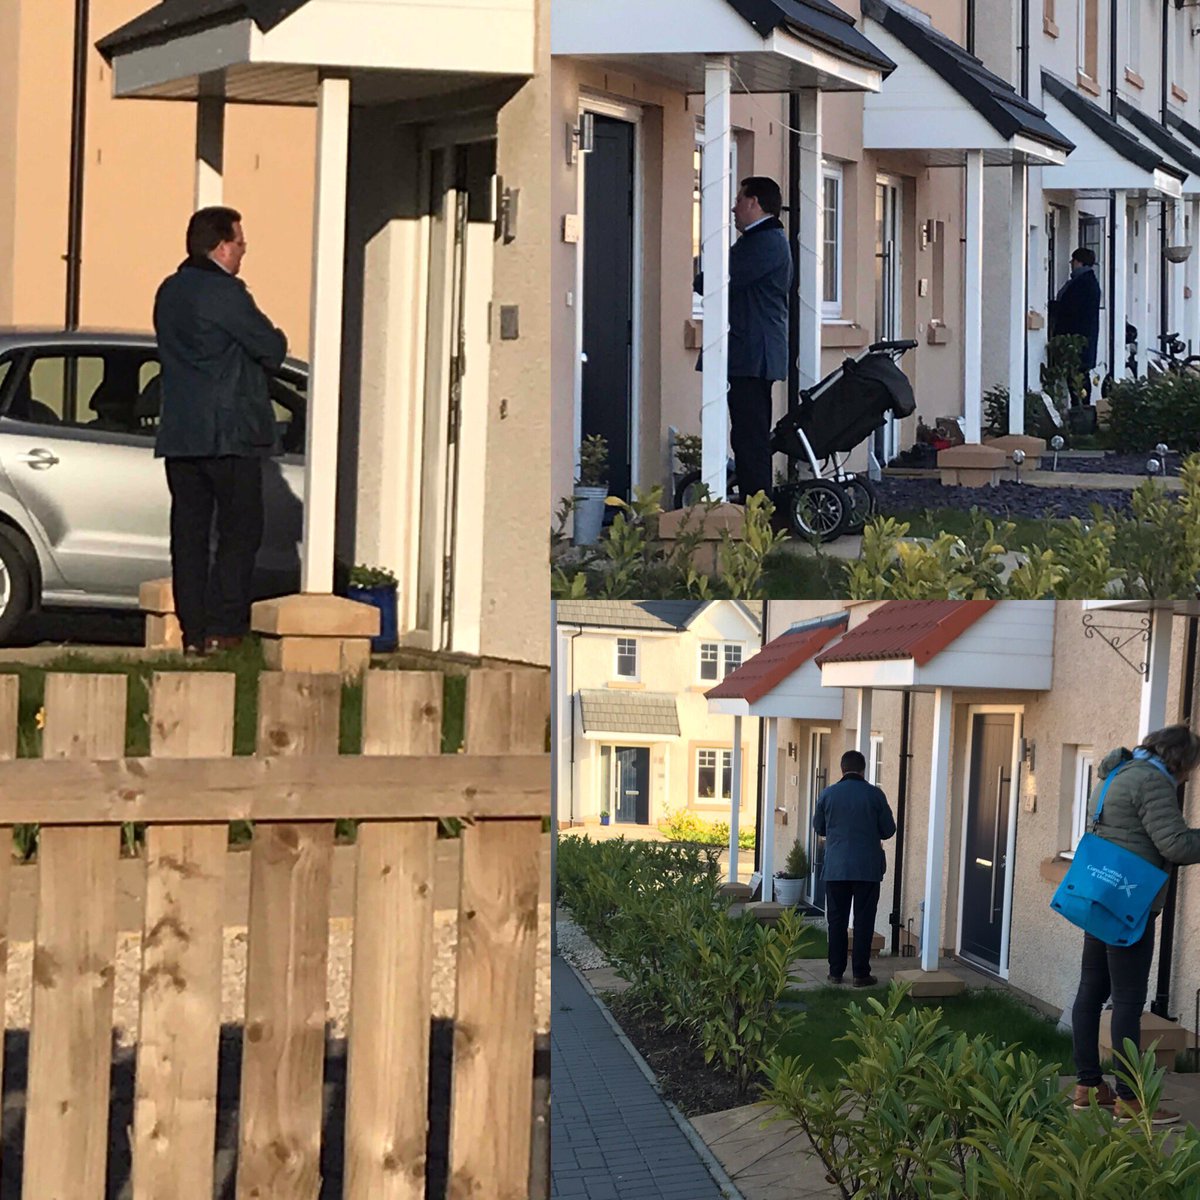 @ScotTories candidate @CraigWHoy1 talking to residents in#Haddington town about the local issues that affect their daily lives. #stronglocalvoice #TeamRuth